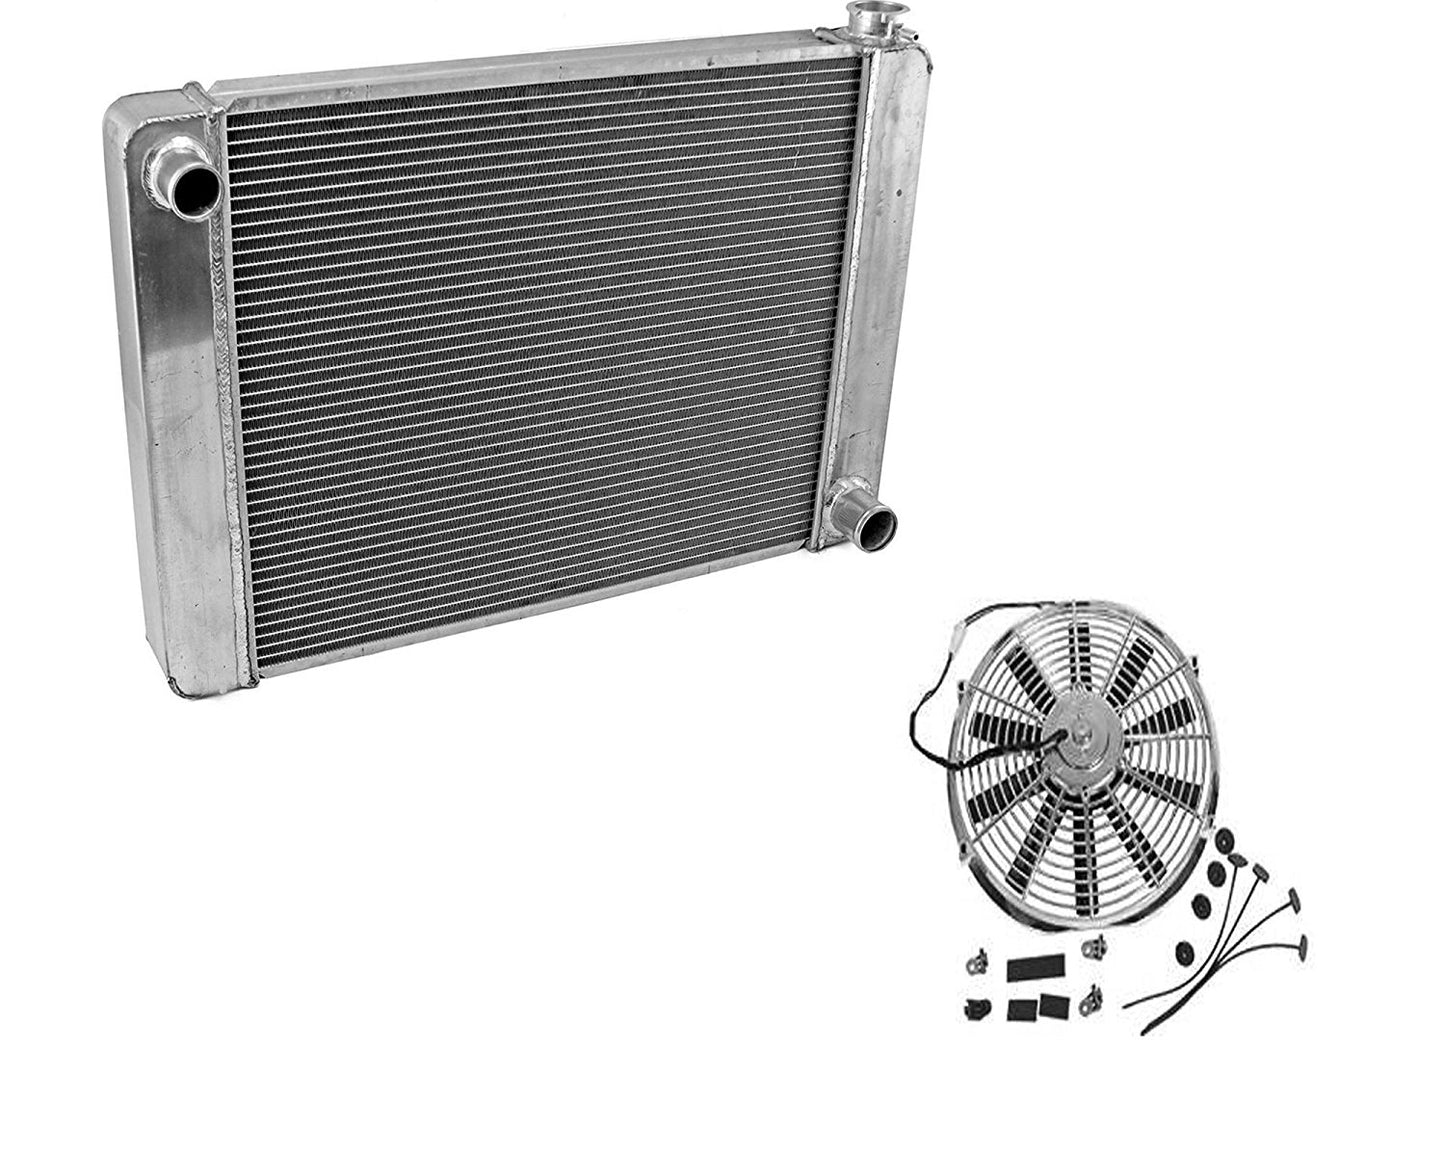 Fabricated Aluminum Radiator 31" x 19" x3" Overall For SBC BBC Chevy GM & Chrome 10" straight blade cooling radiator fan